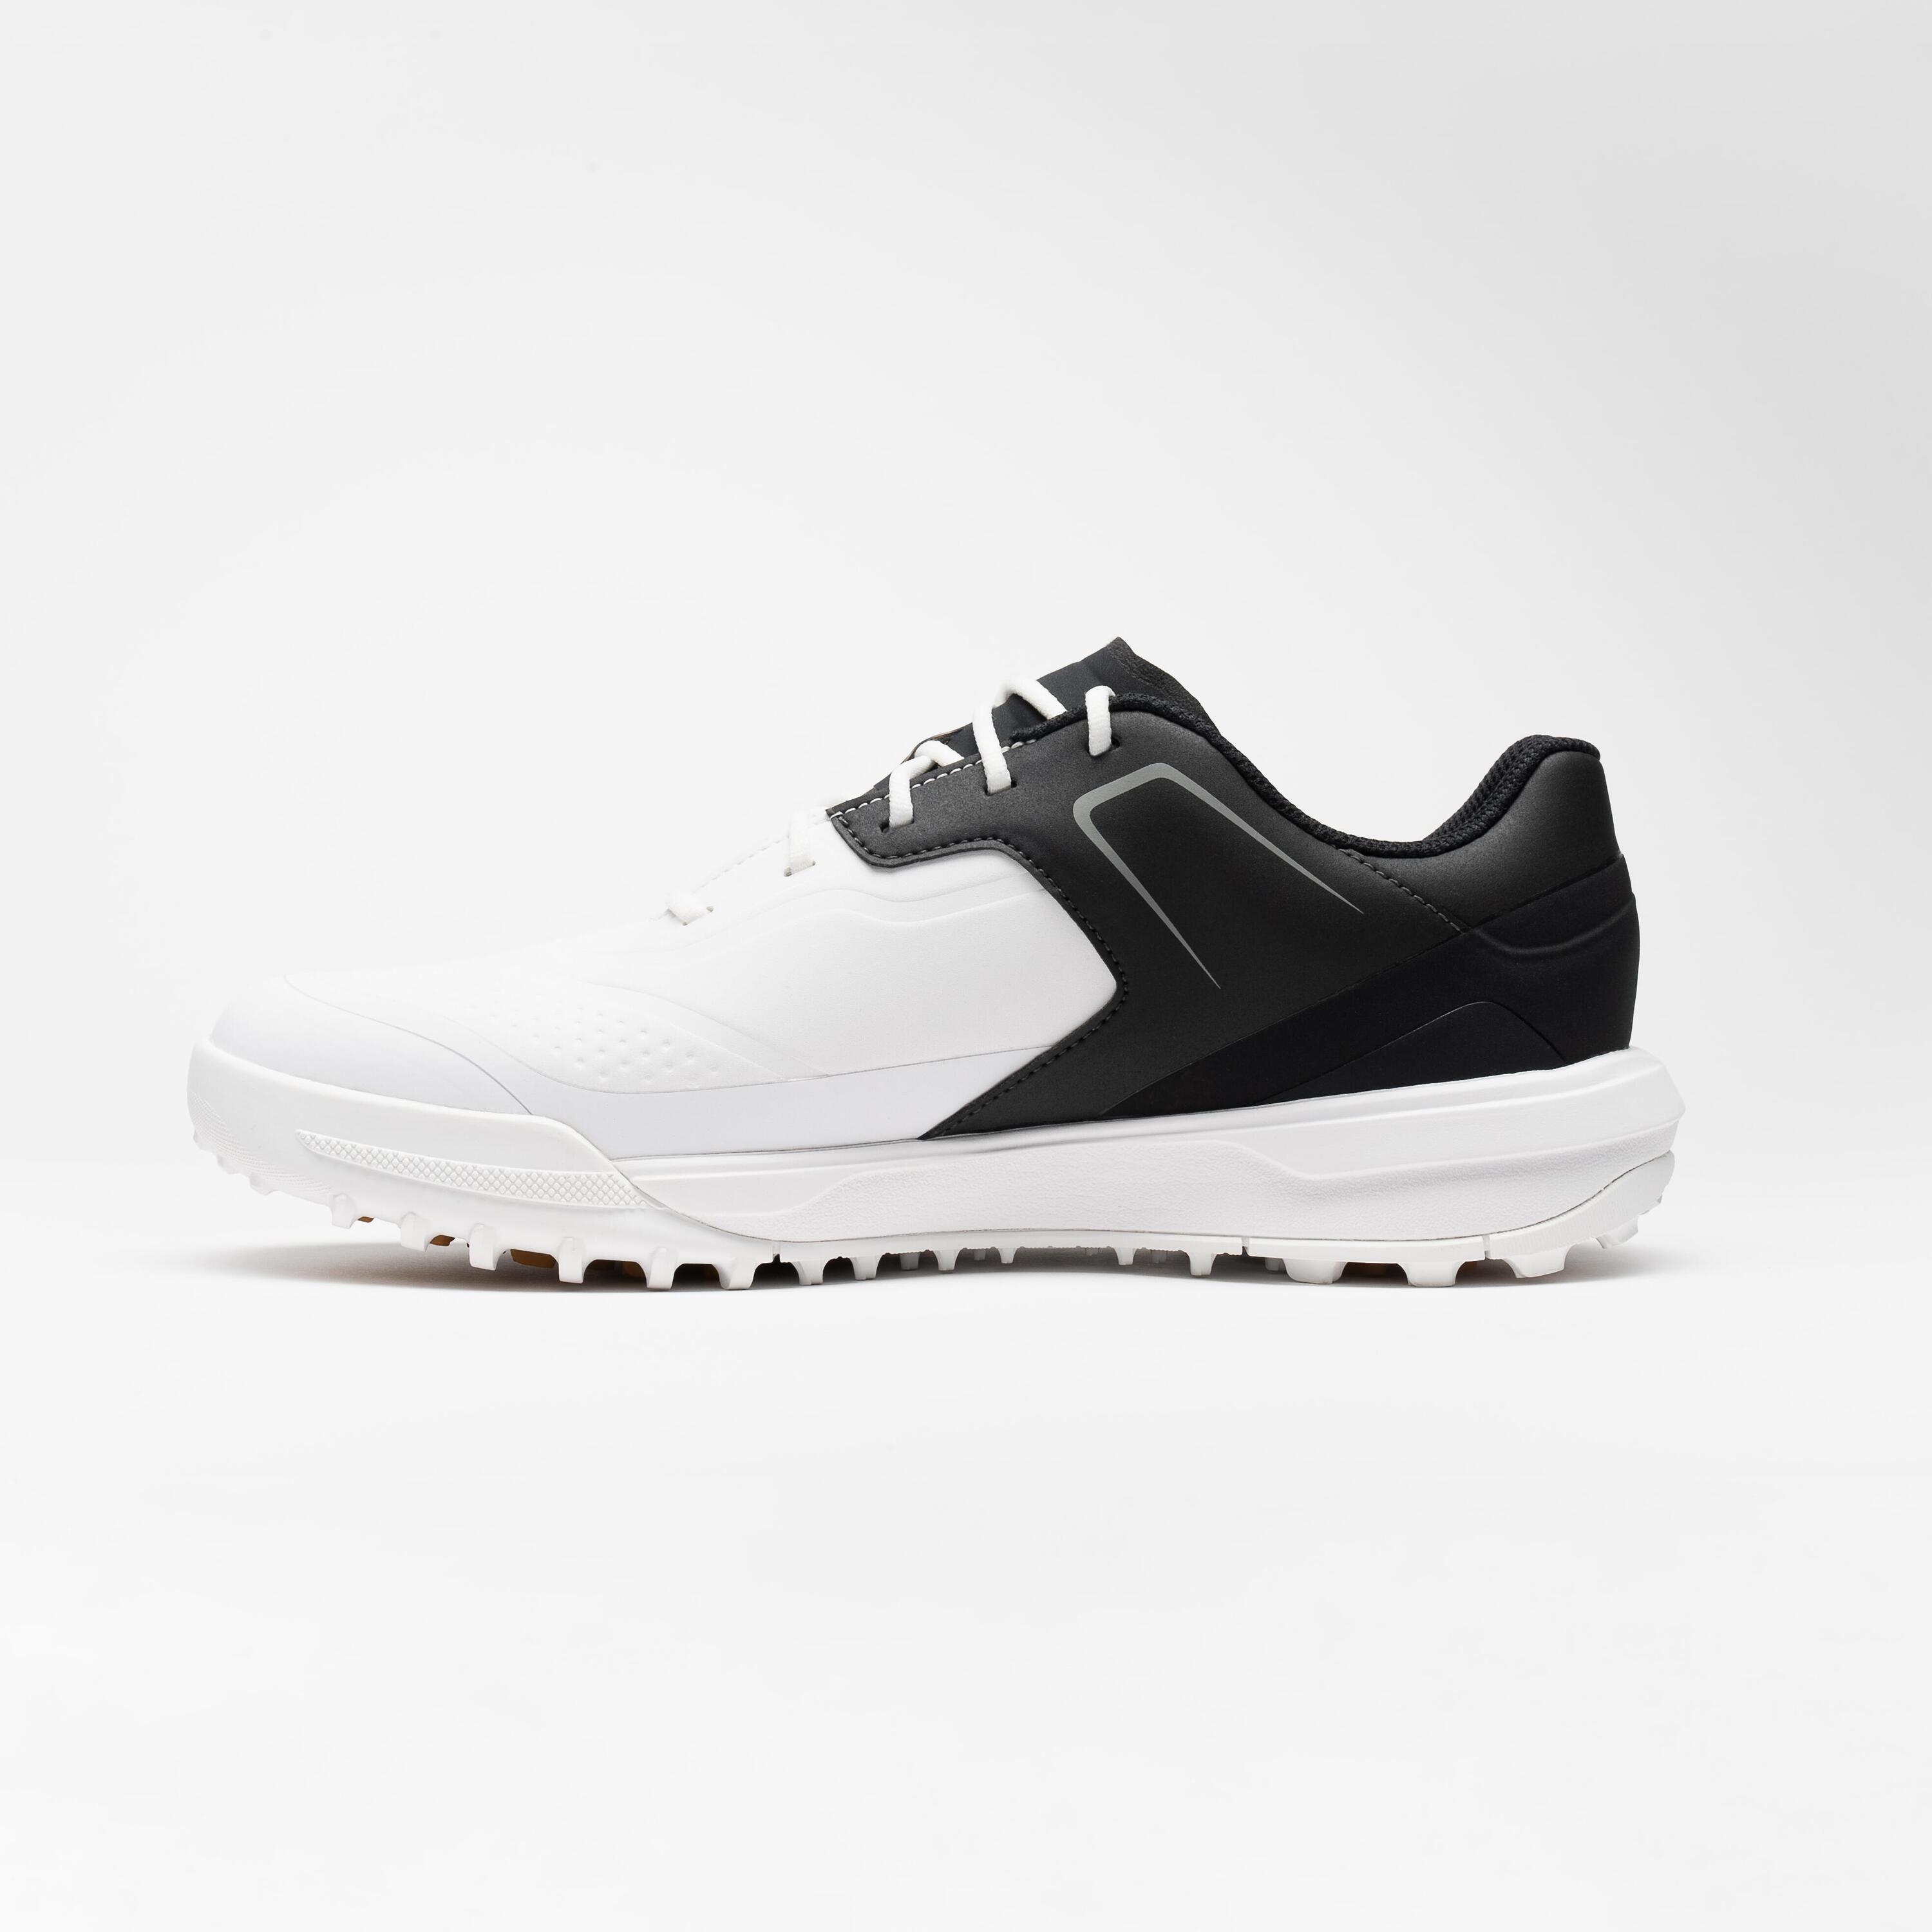 Men's golf waterproof shoes - MW 500 - white and carbon 2/7